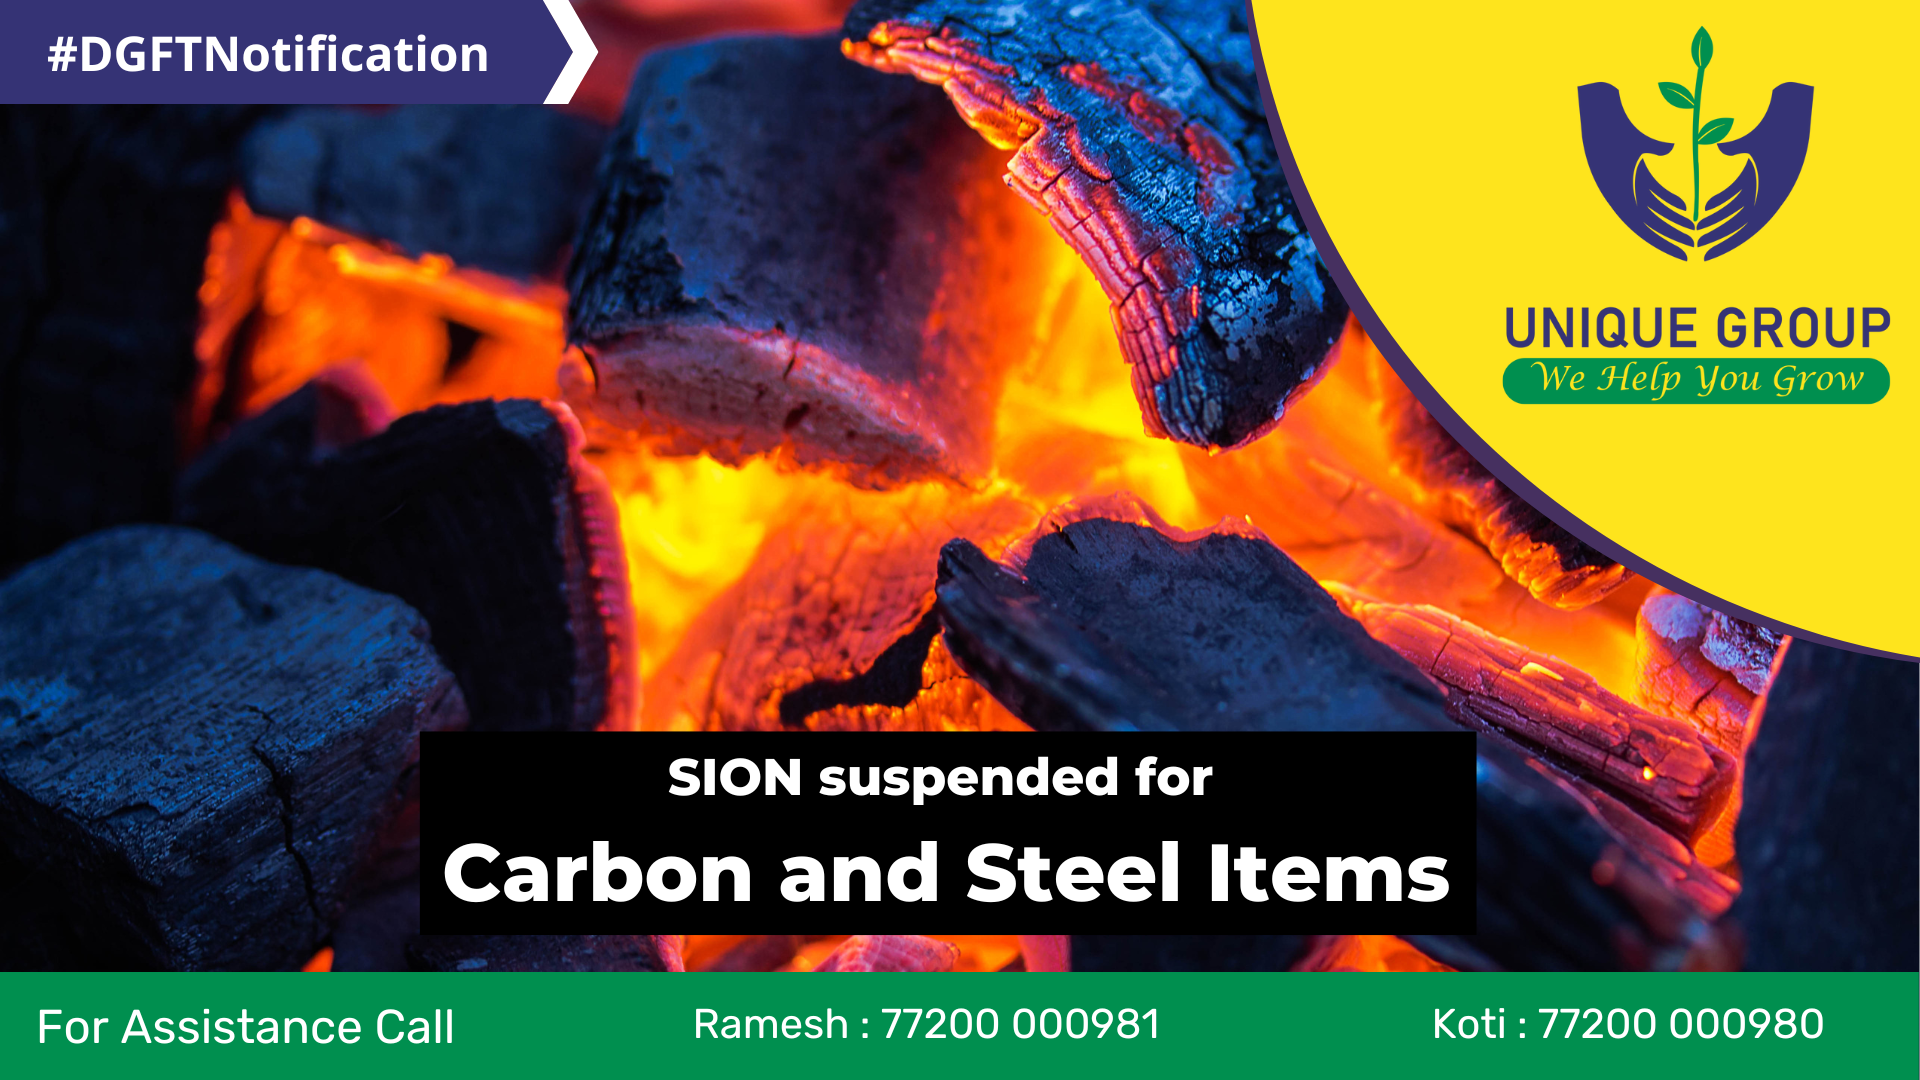 Standard Input output norms have been suspended for carbon and stainless steel